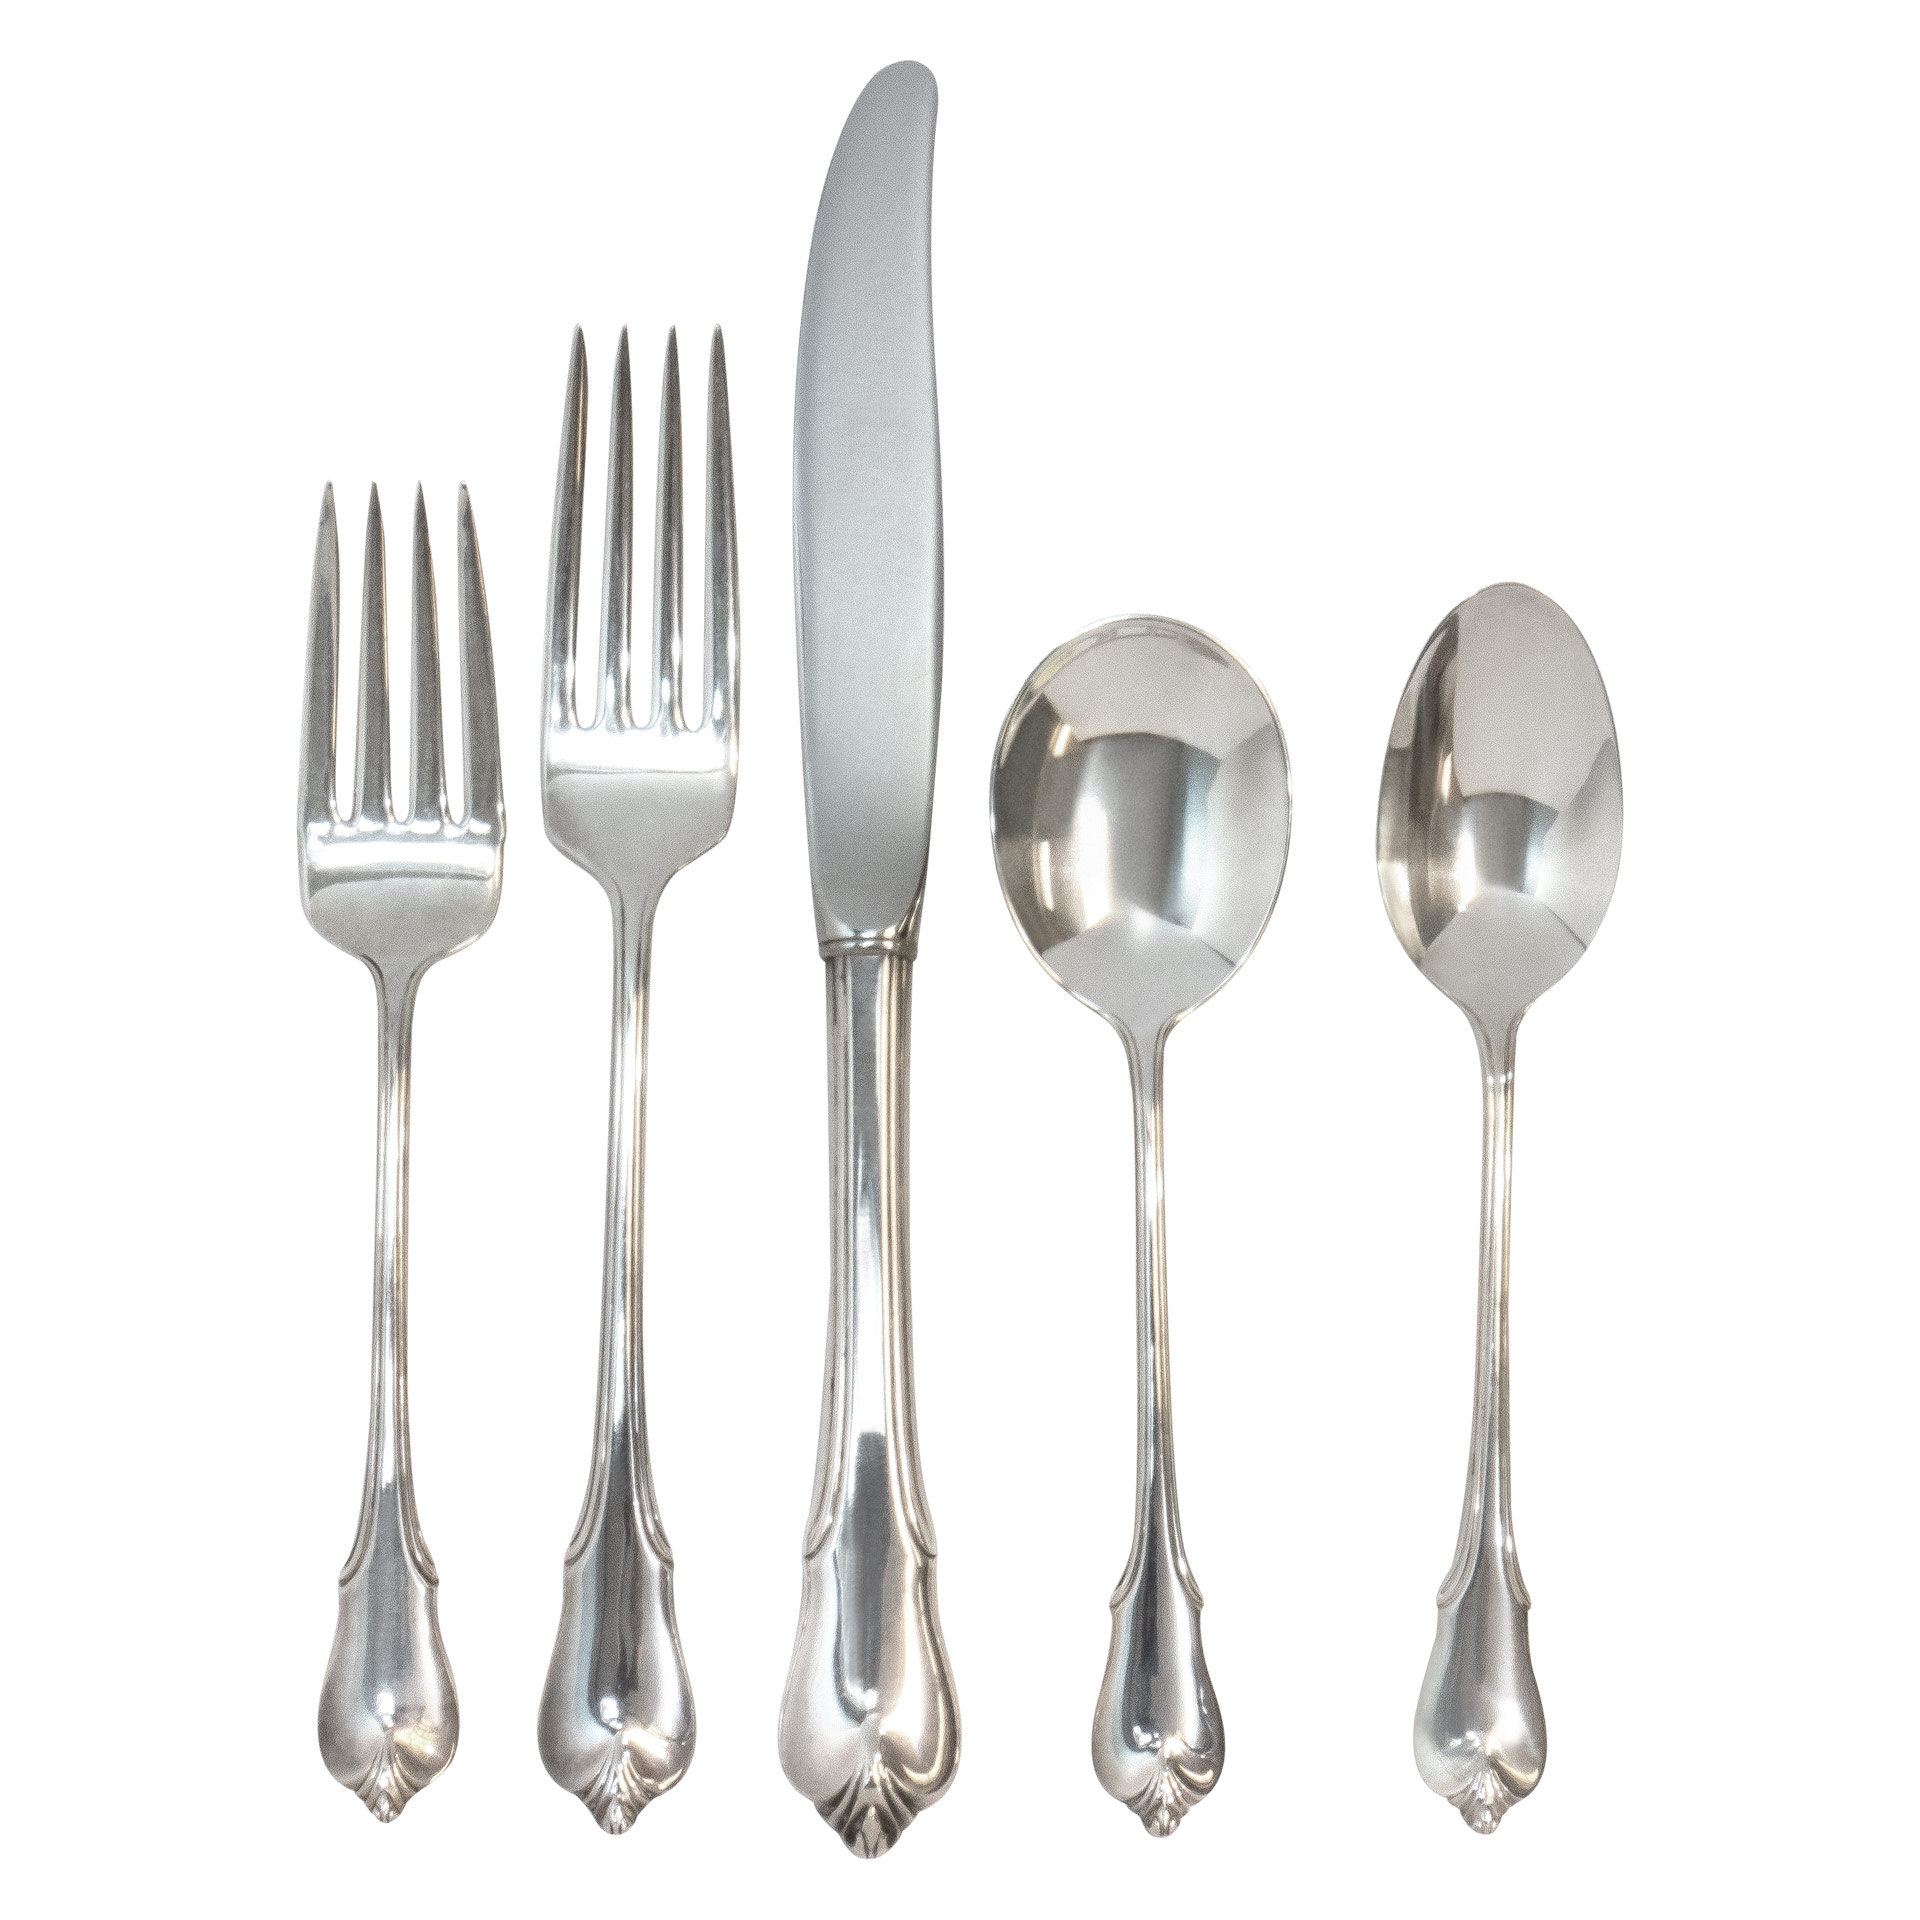 "GRAND COLONIAL" Sterling Silver Flatware Set patented in 1942 by WALLACE. 5 Place Setting for 12 + 11 Serving Pieces. Over 2300 grams of Sterling Silver. image 1